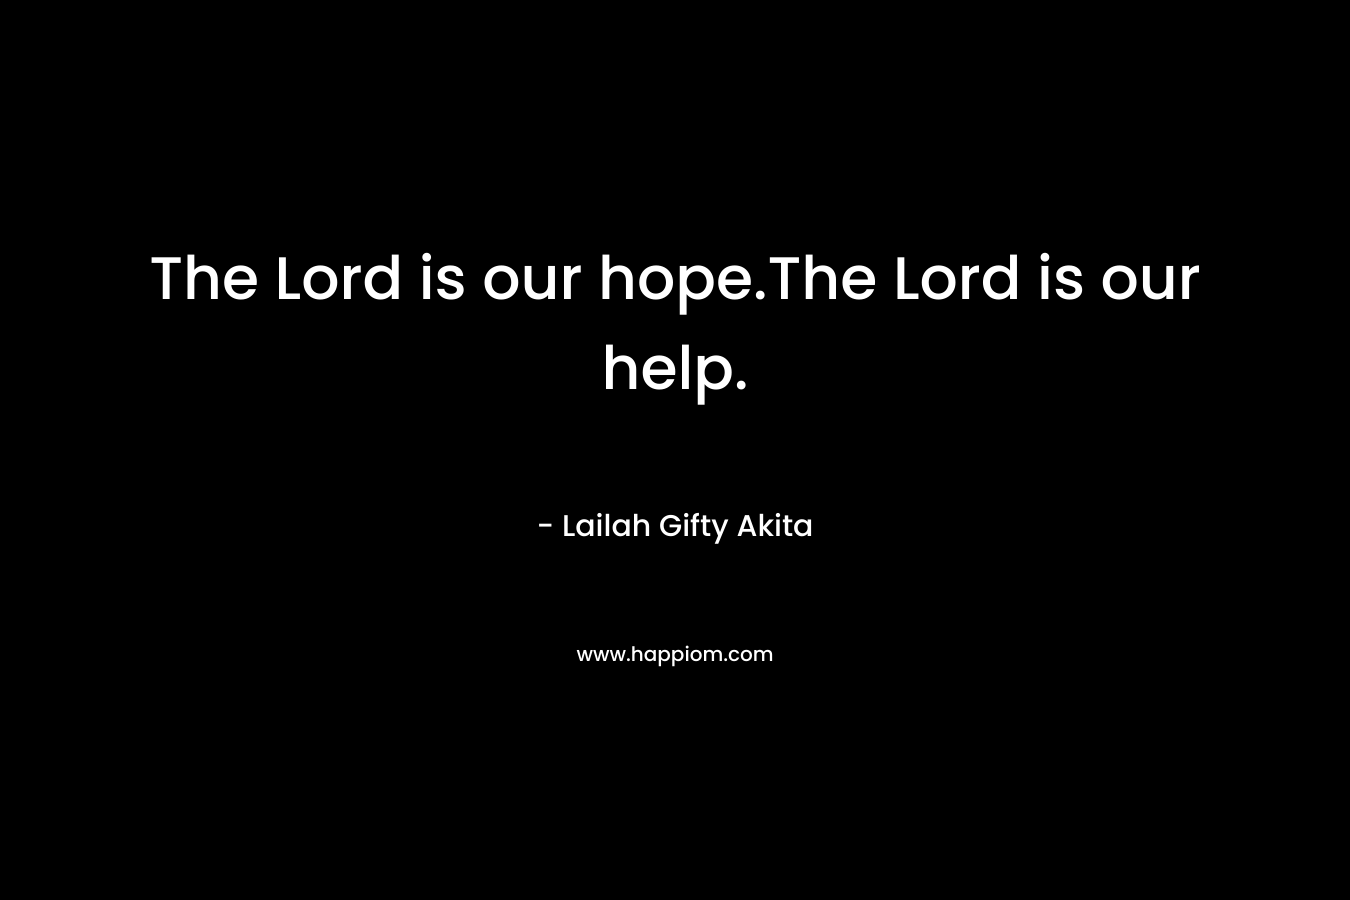 The Lord is our hope.The Lord is our help.